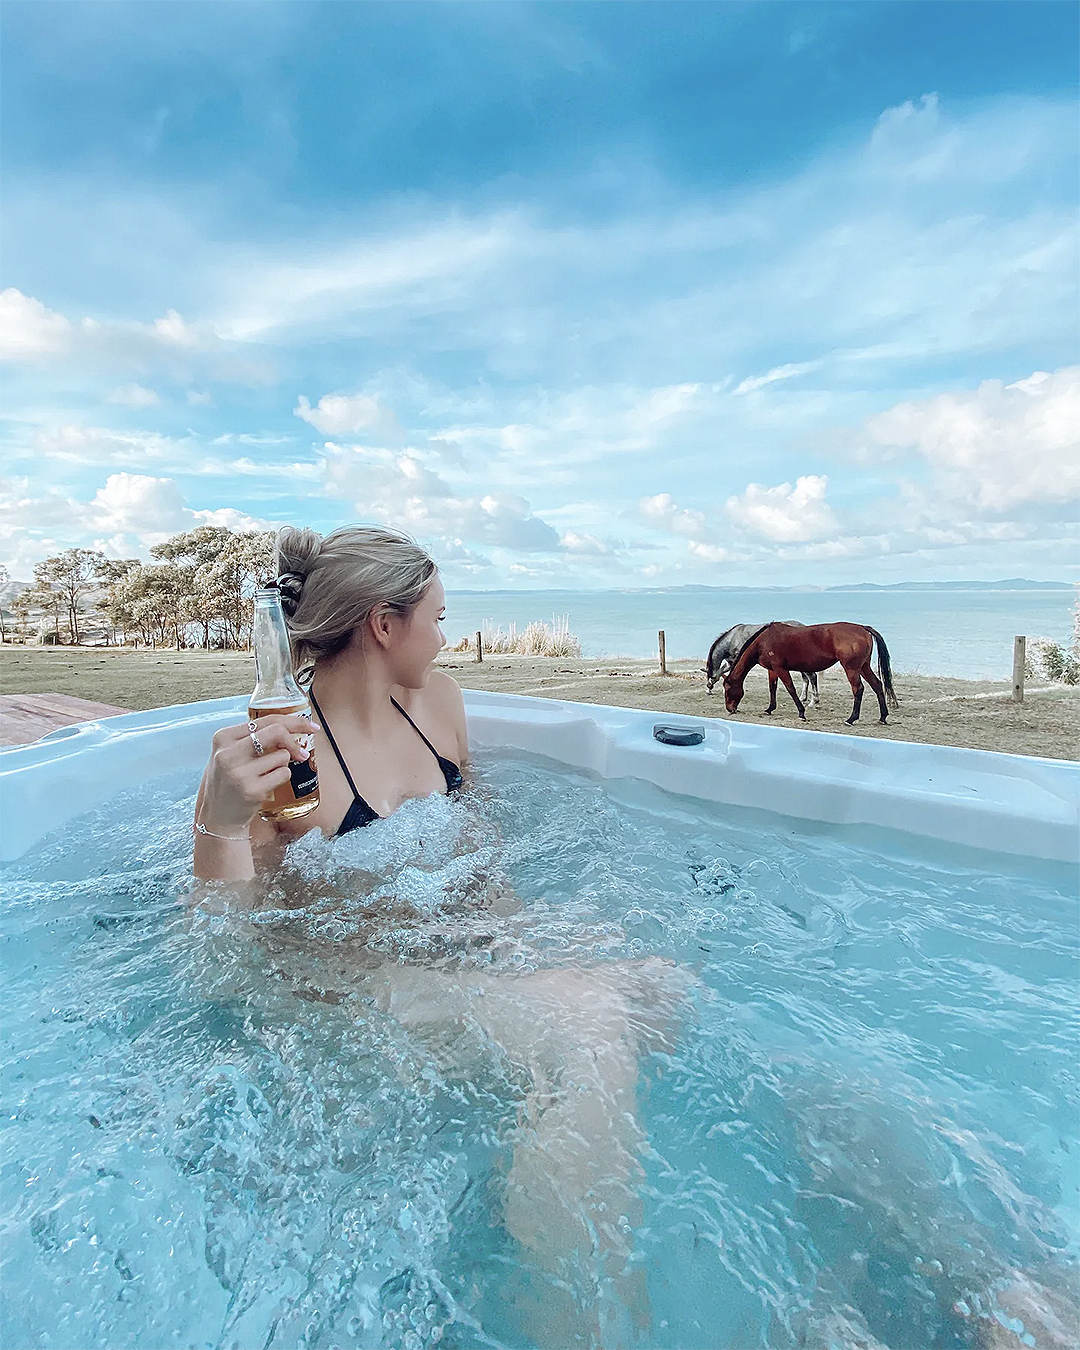 A woman looks at horses grazing from a hot tub.